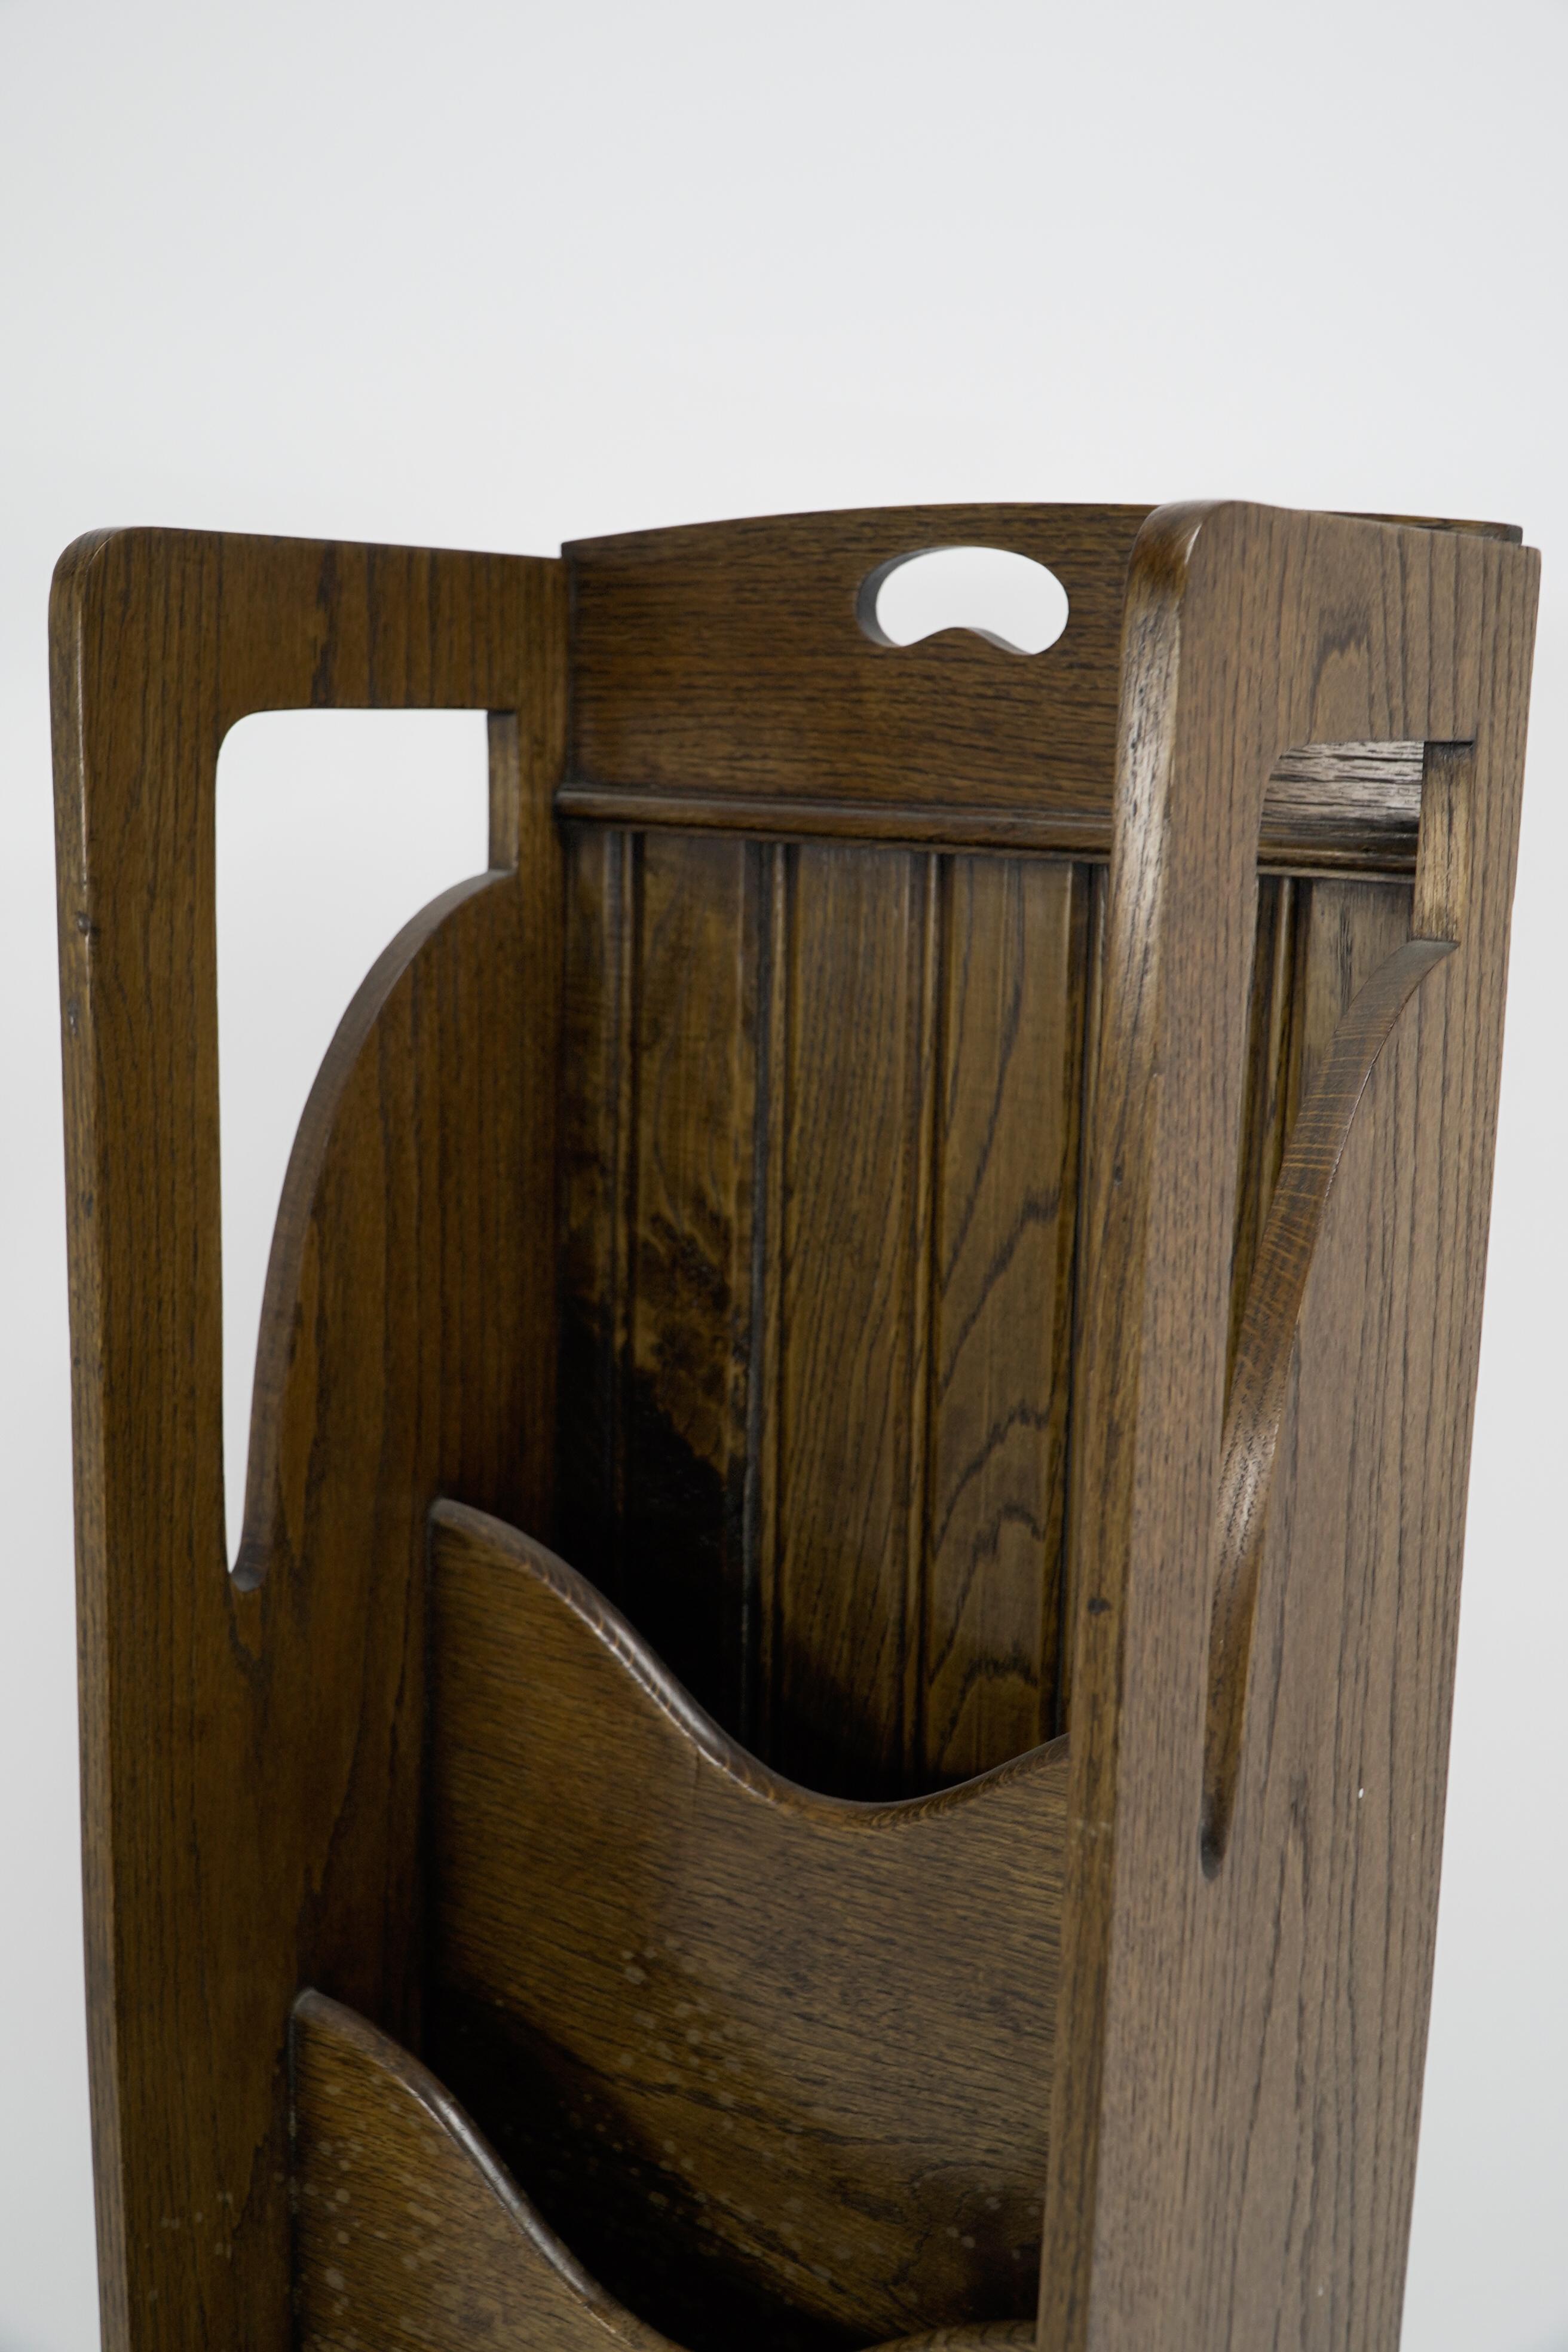 Wylie and Lochhead attributed. A Glasgow Style Arts and Crafts oak magazine rack For Sale 1